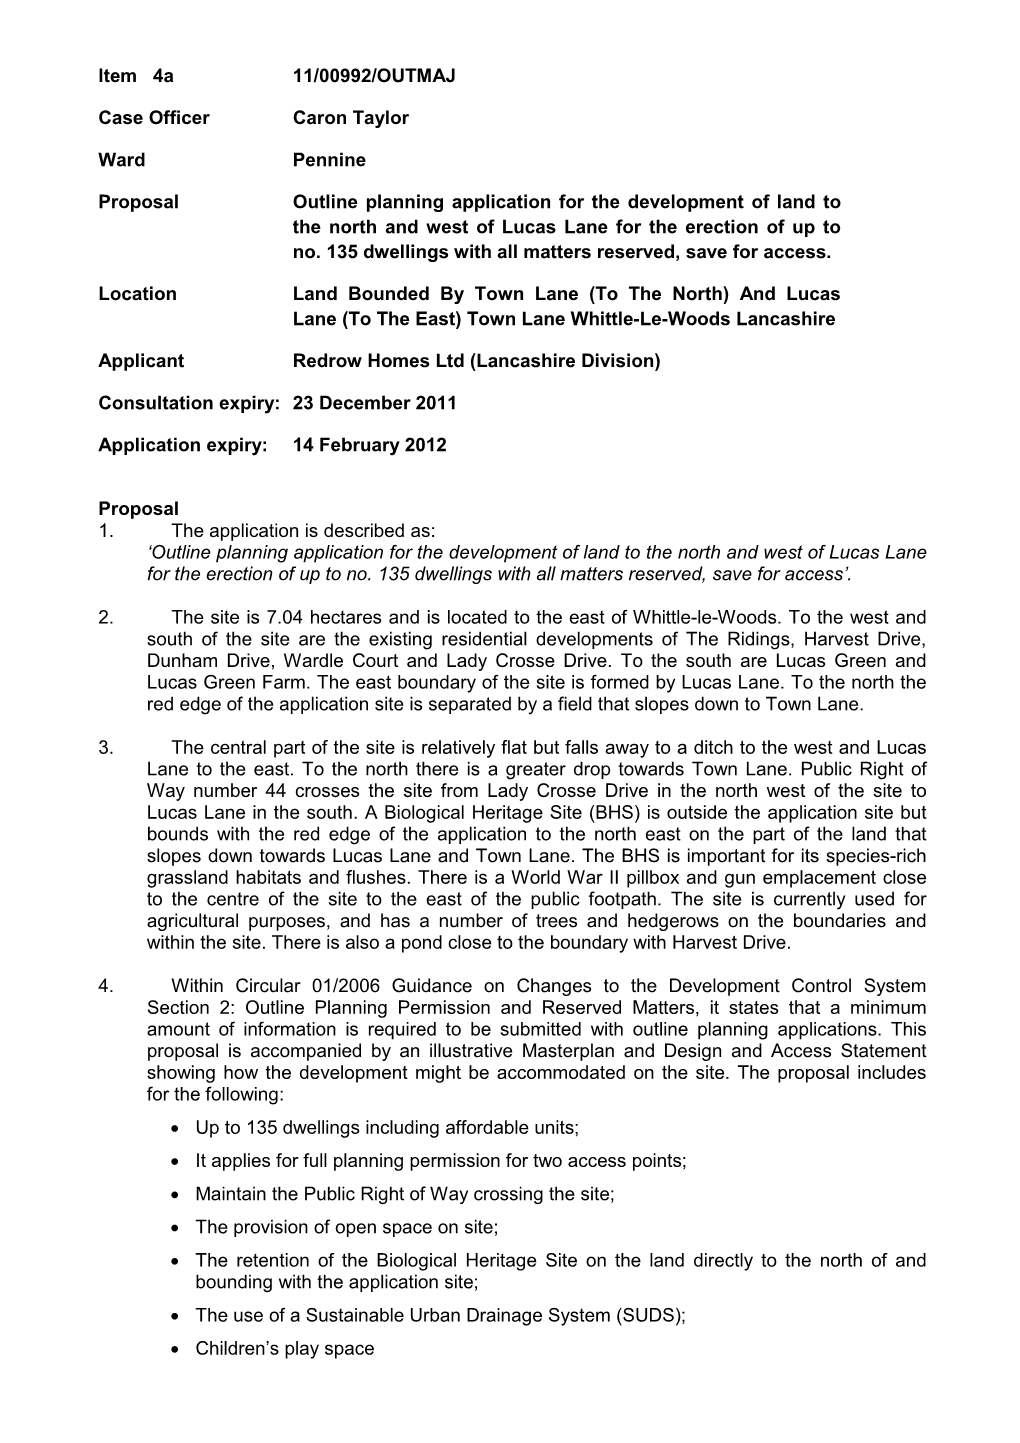 Item 4A 11/00992/OUTMAJ Case Officer Caron Taylor Ward Pennine Proposal Outline Planning Application for the Development Of